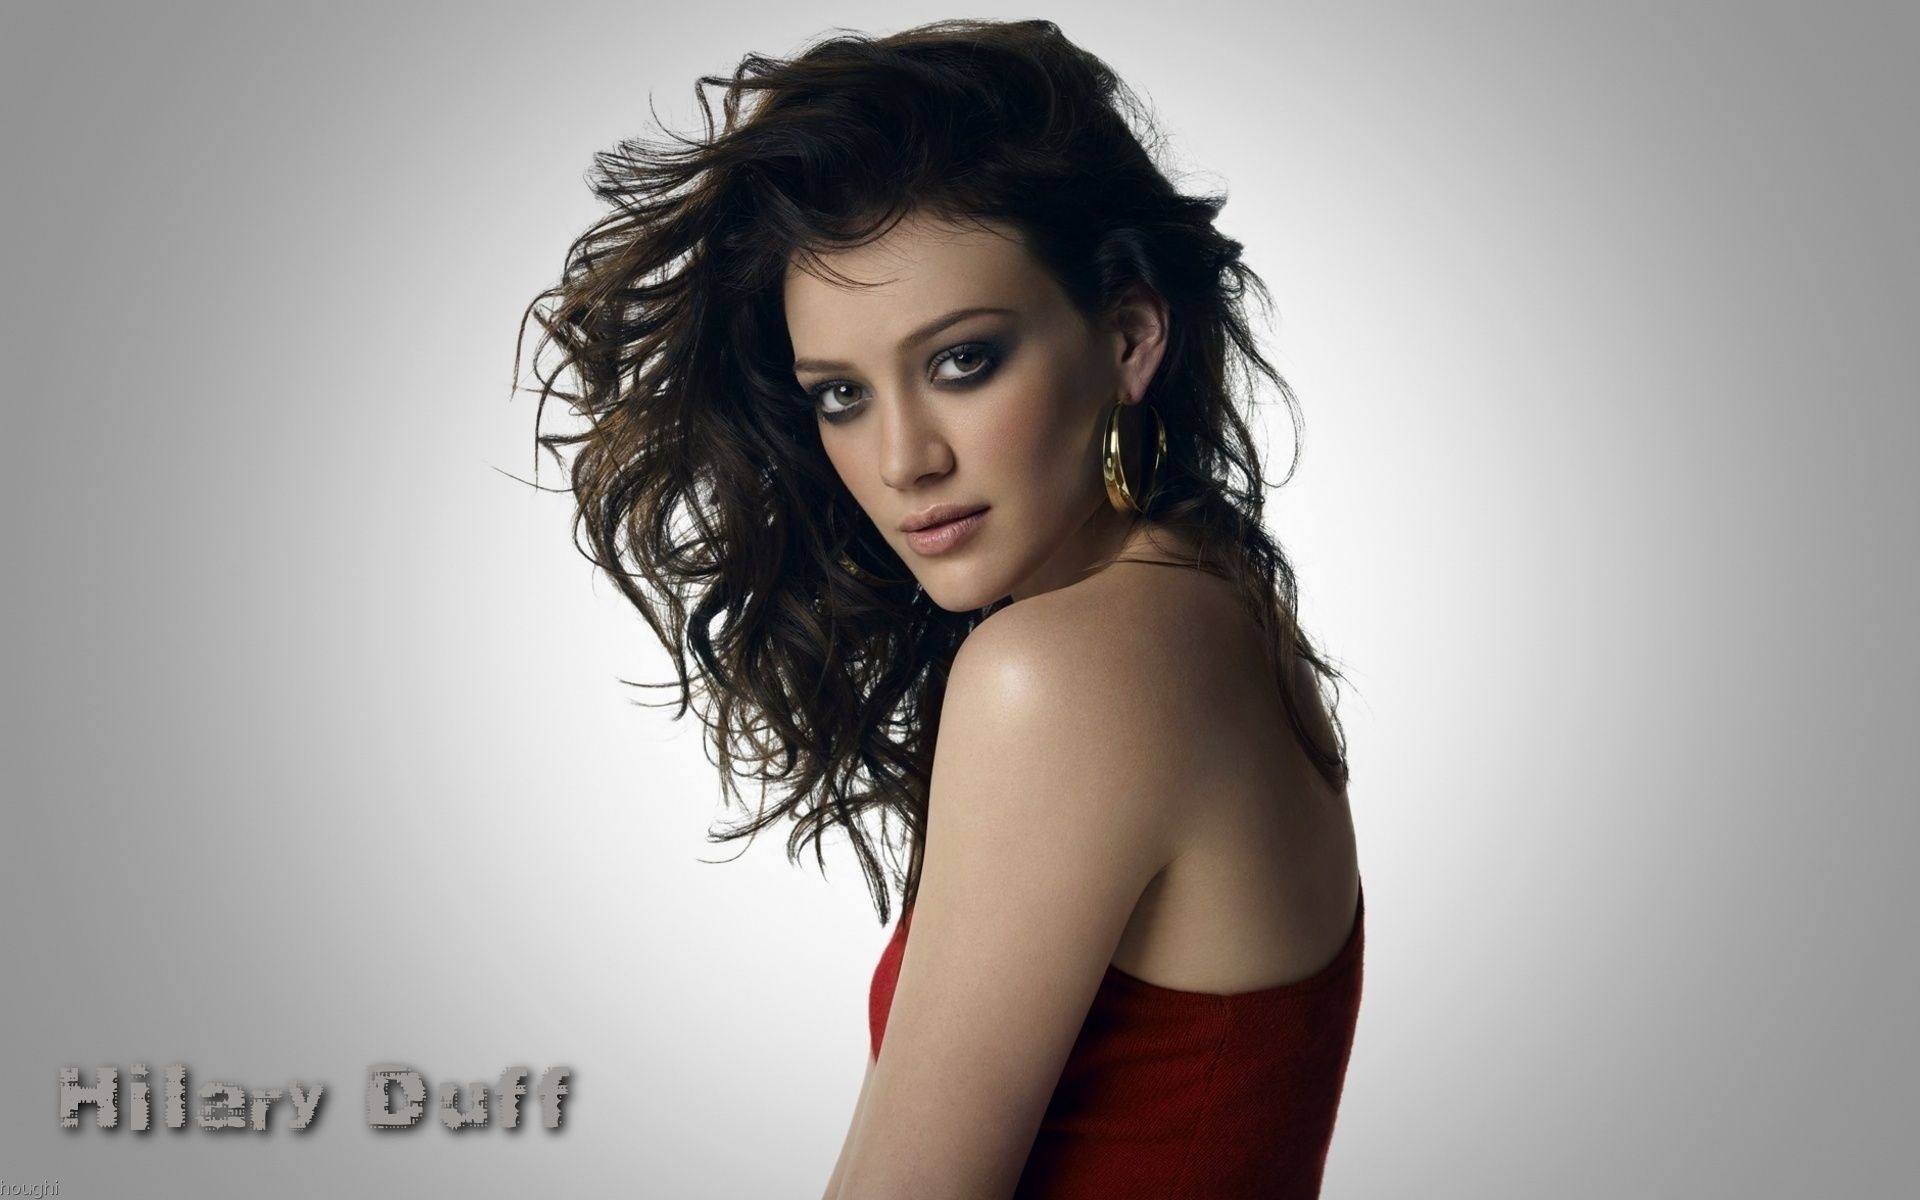 Hilary Duff #037 - 1920x1200 Wallpapers Pictures Photos Images